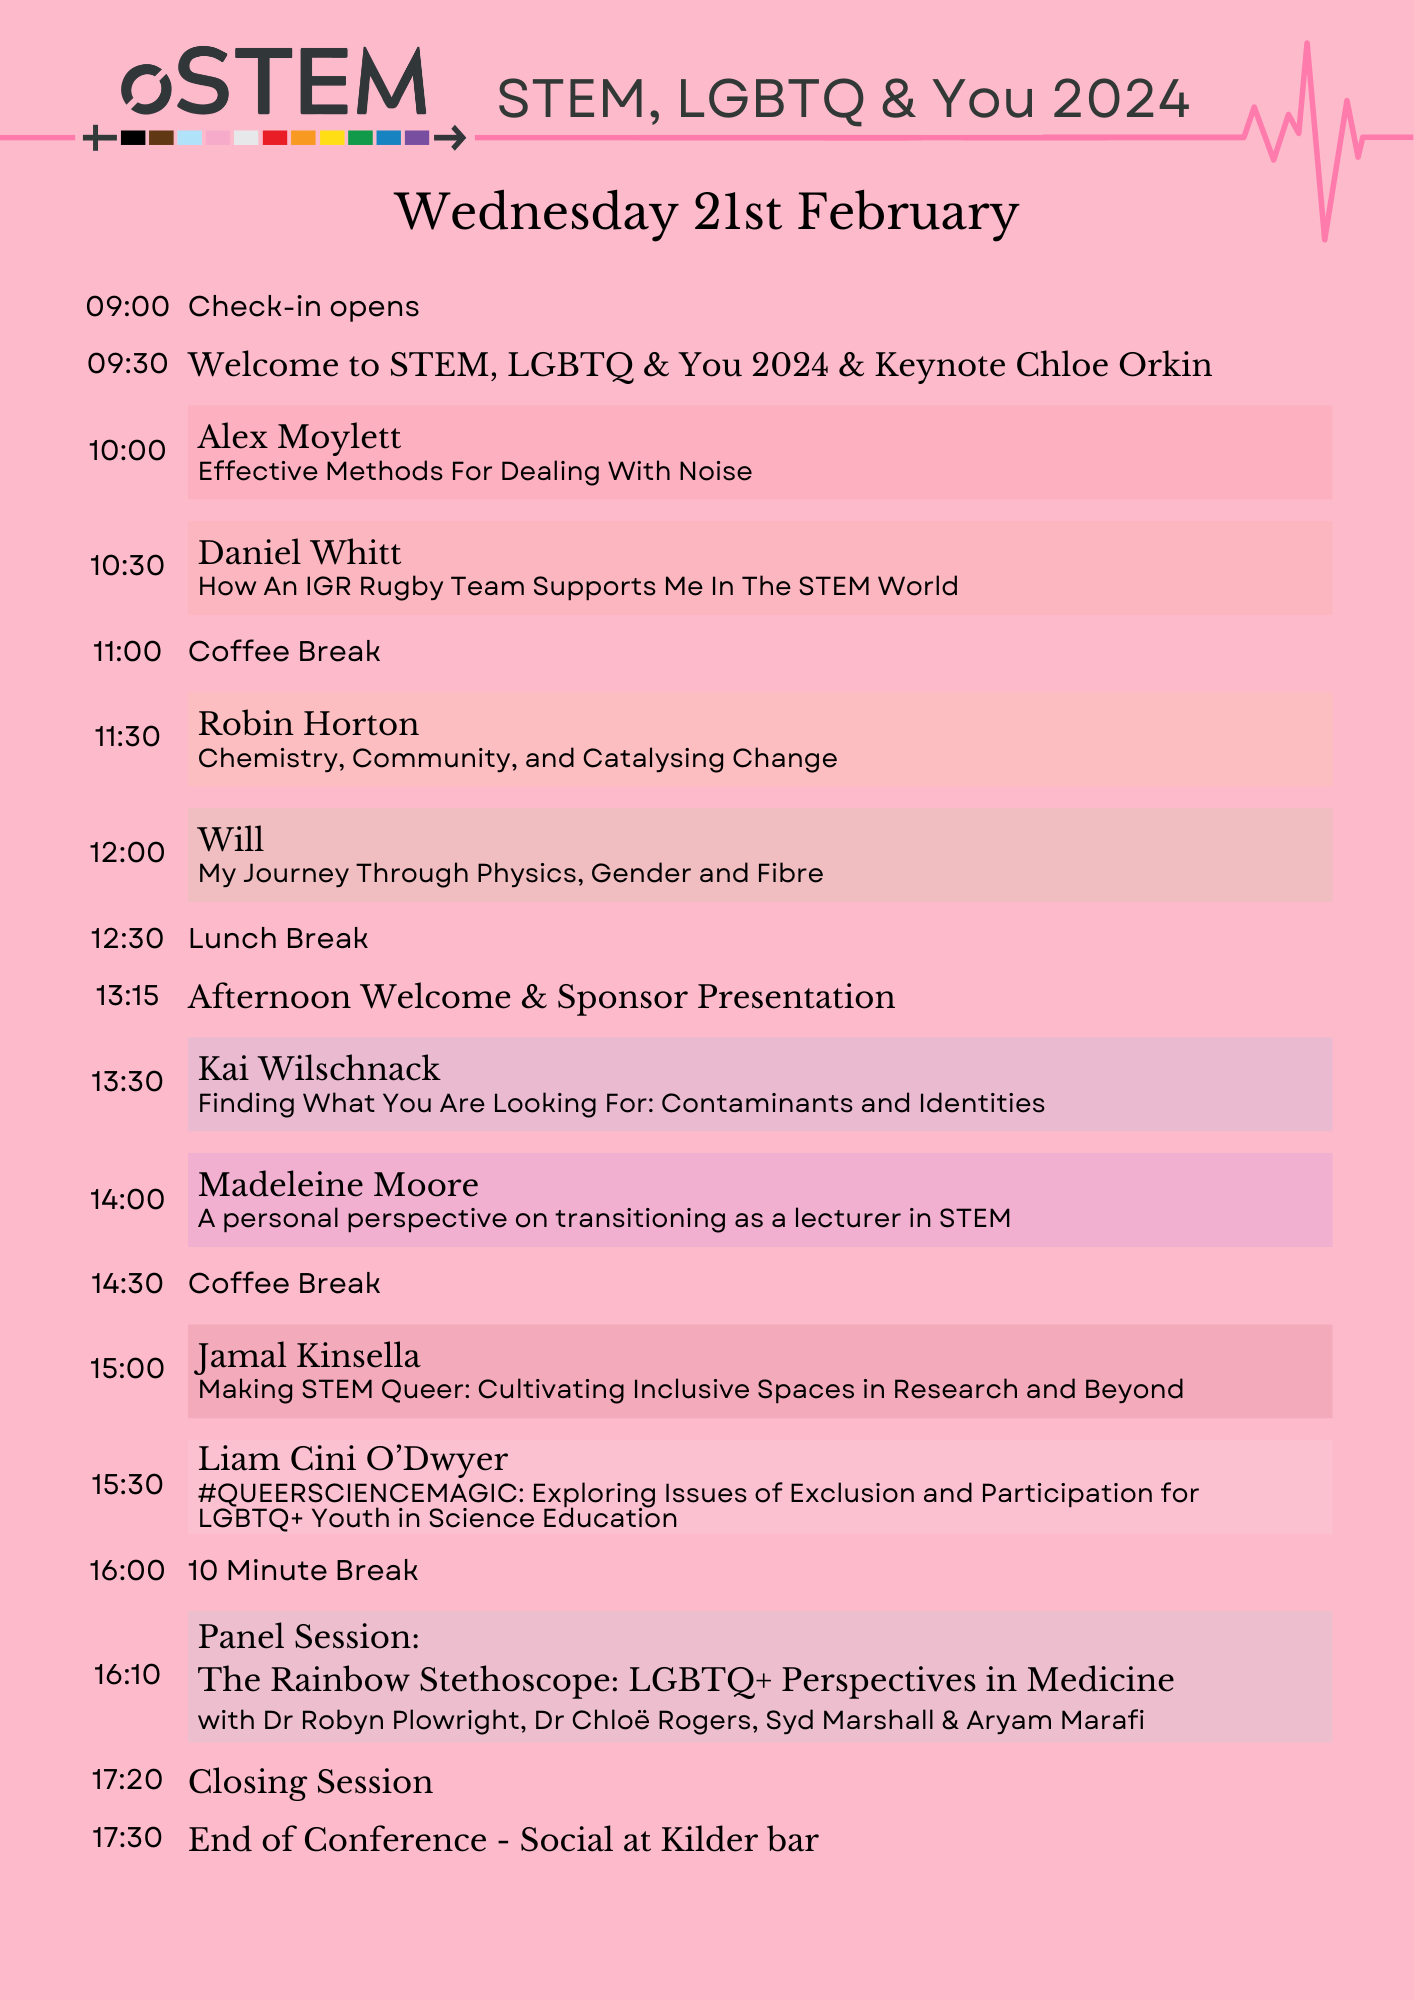 The schedule for STEM, LGBTQ & You 2024. Click this image to access a PDF copy of this image.